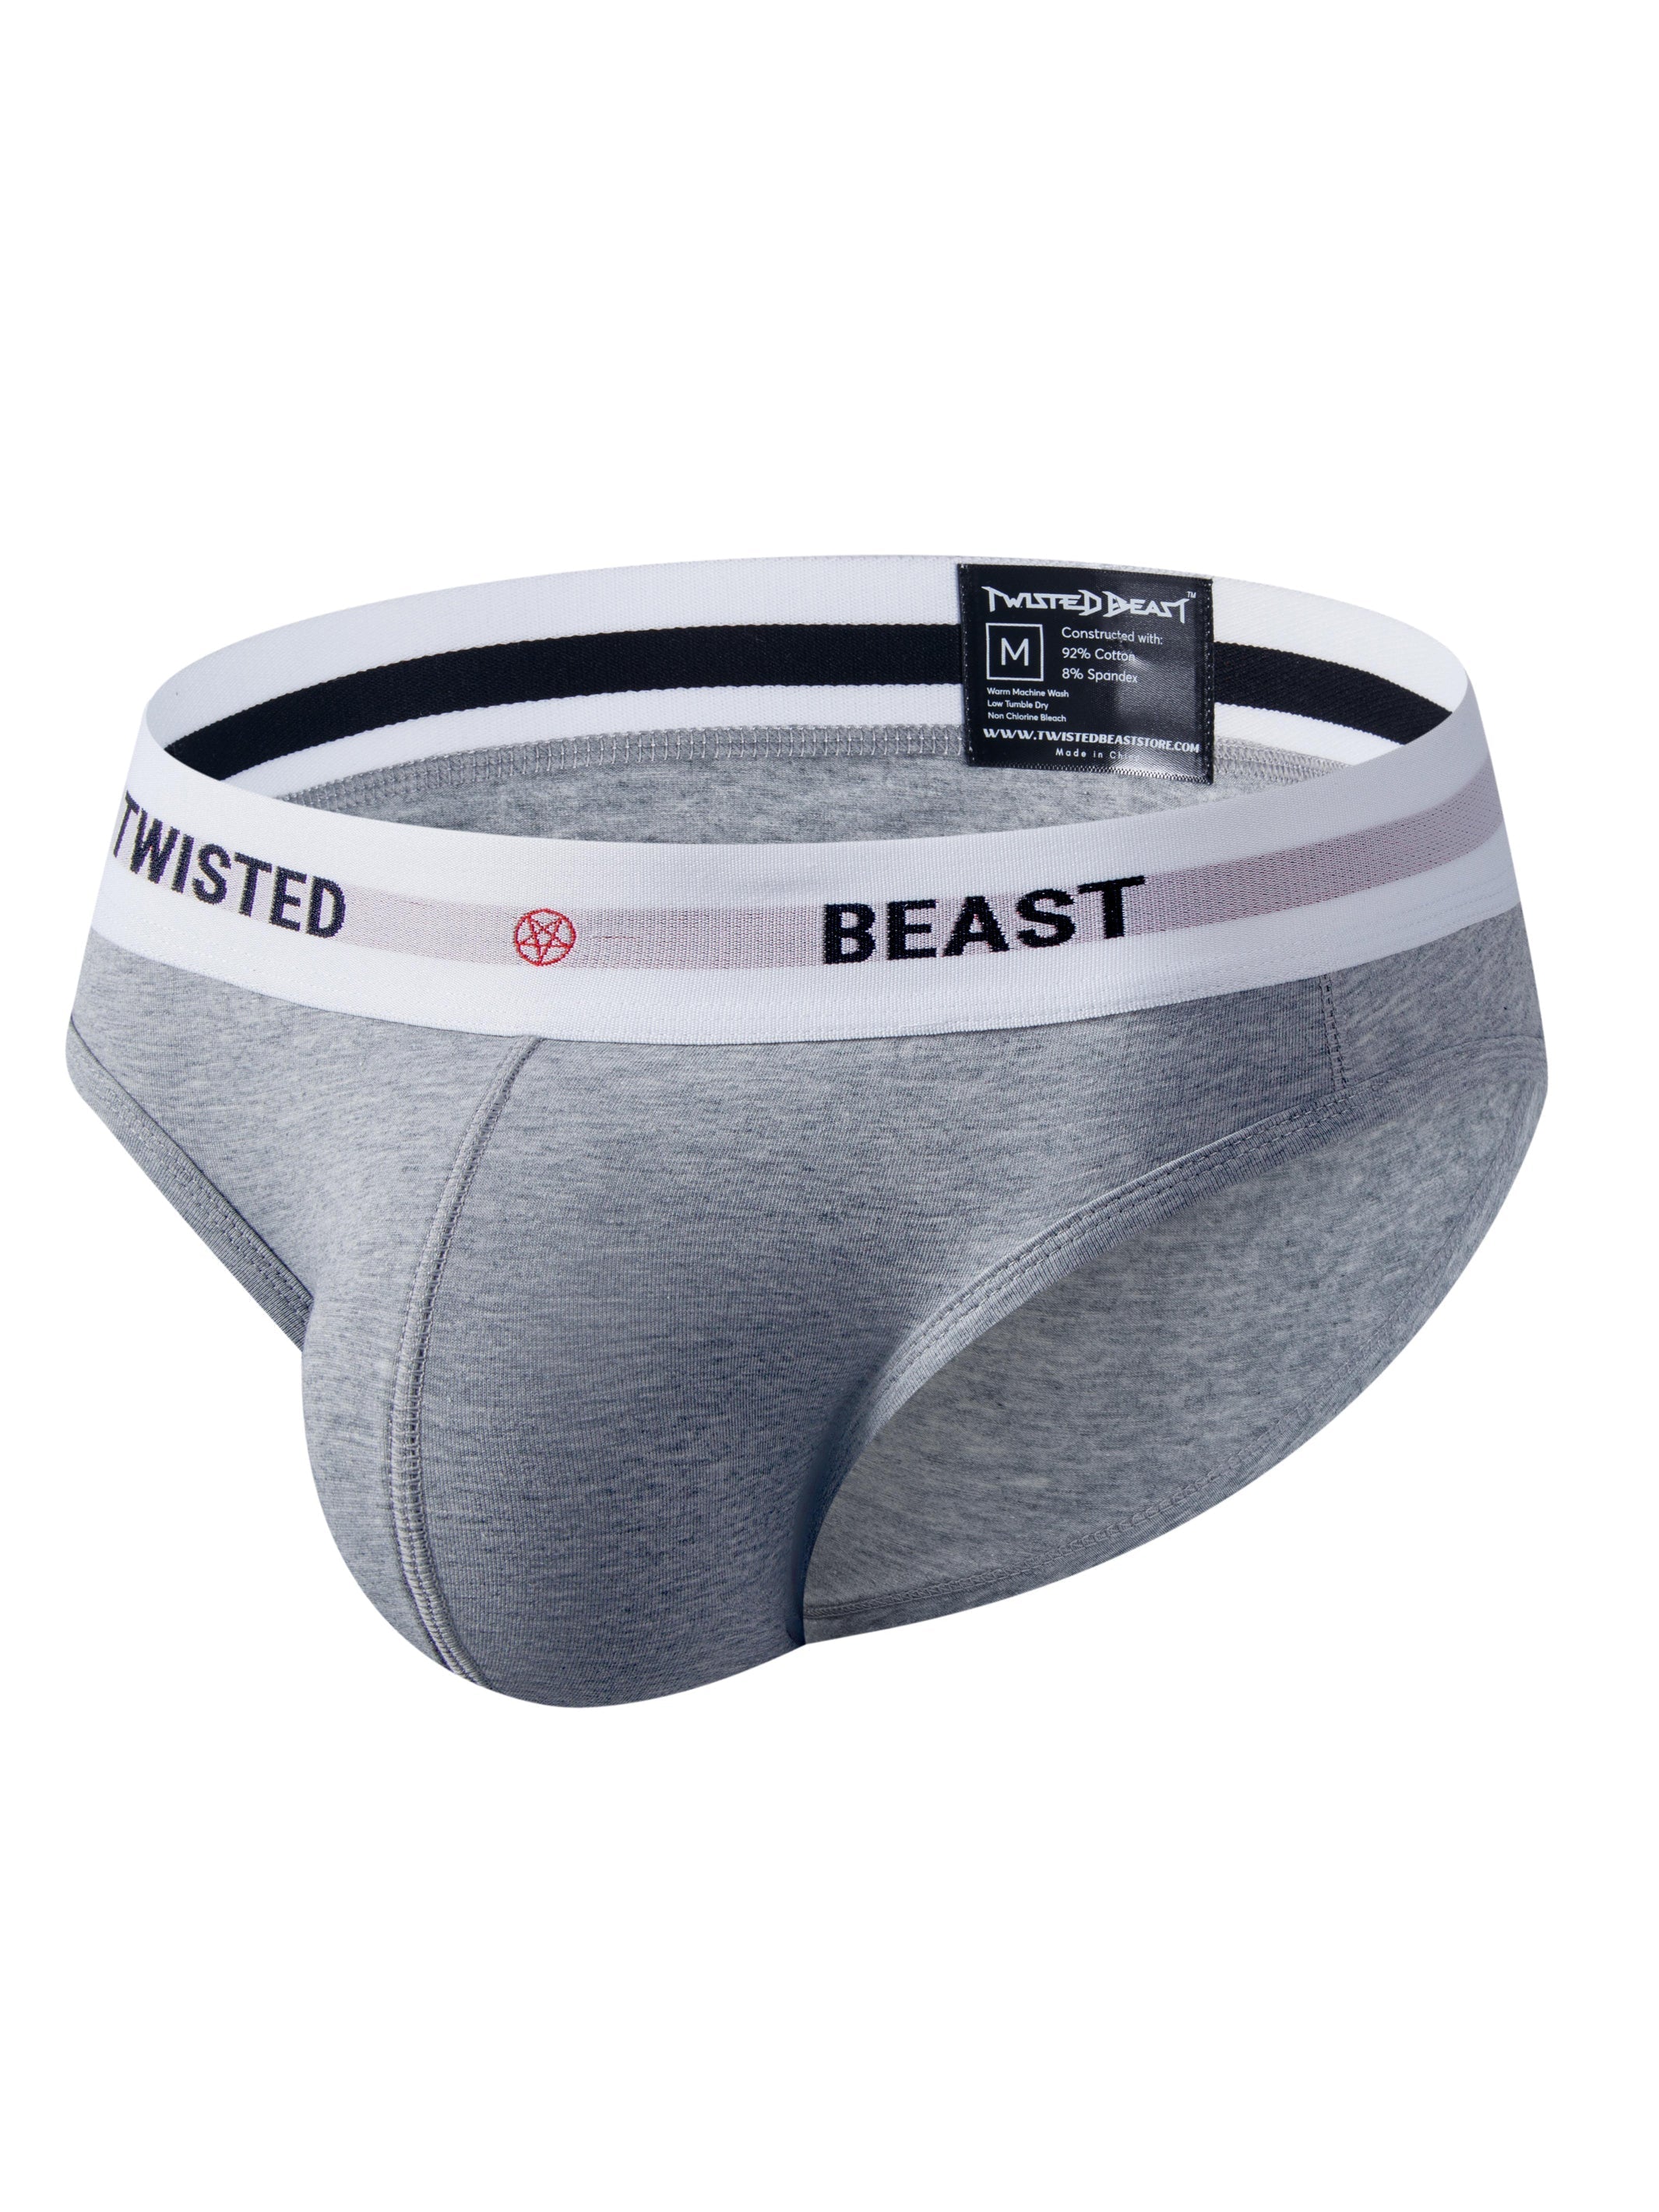 A pair of Insignia Brief's in Grey from Twisted Beast from the side.